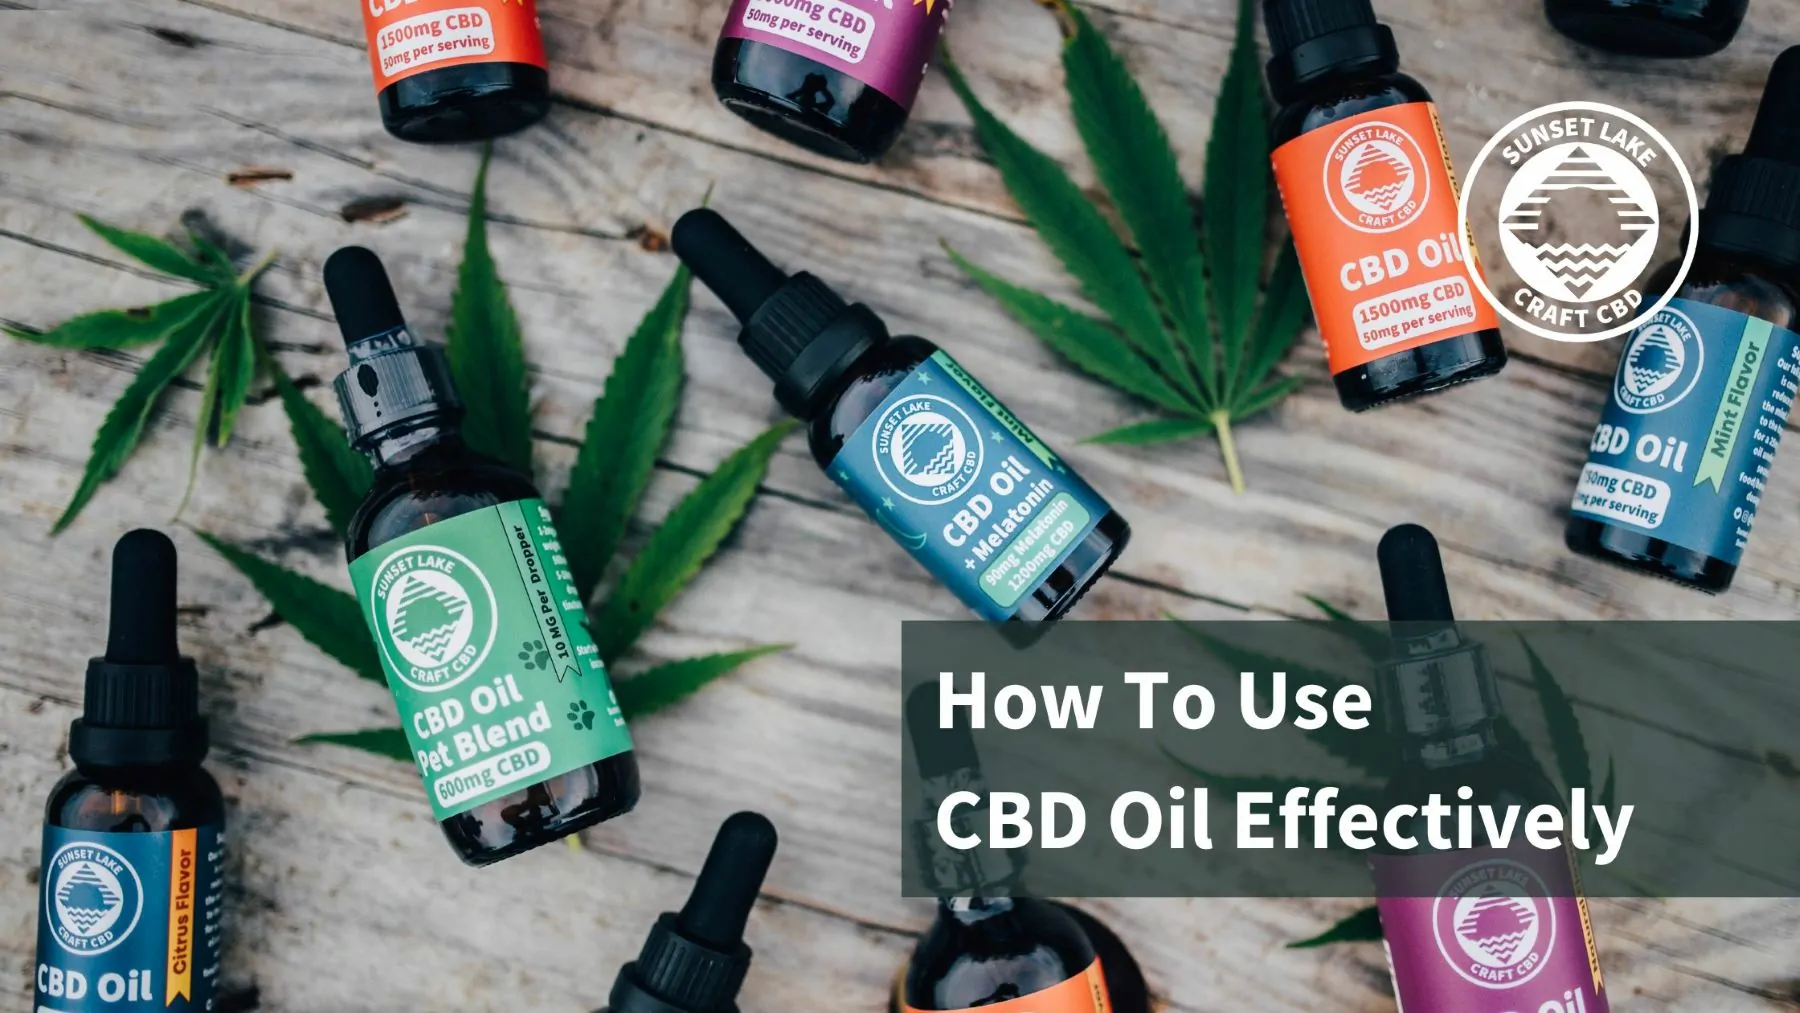 How To Use CBD Oil Effectively: A Beginner’s Guide